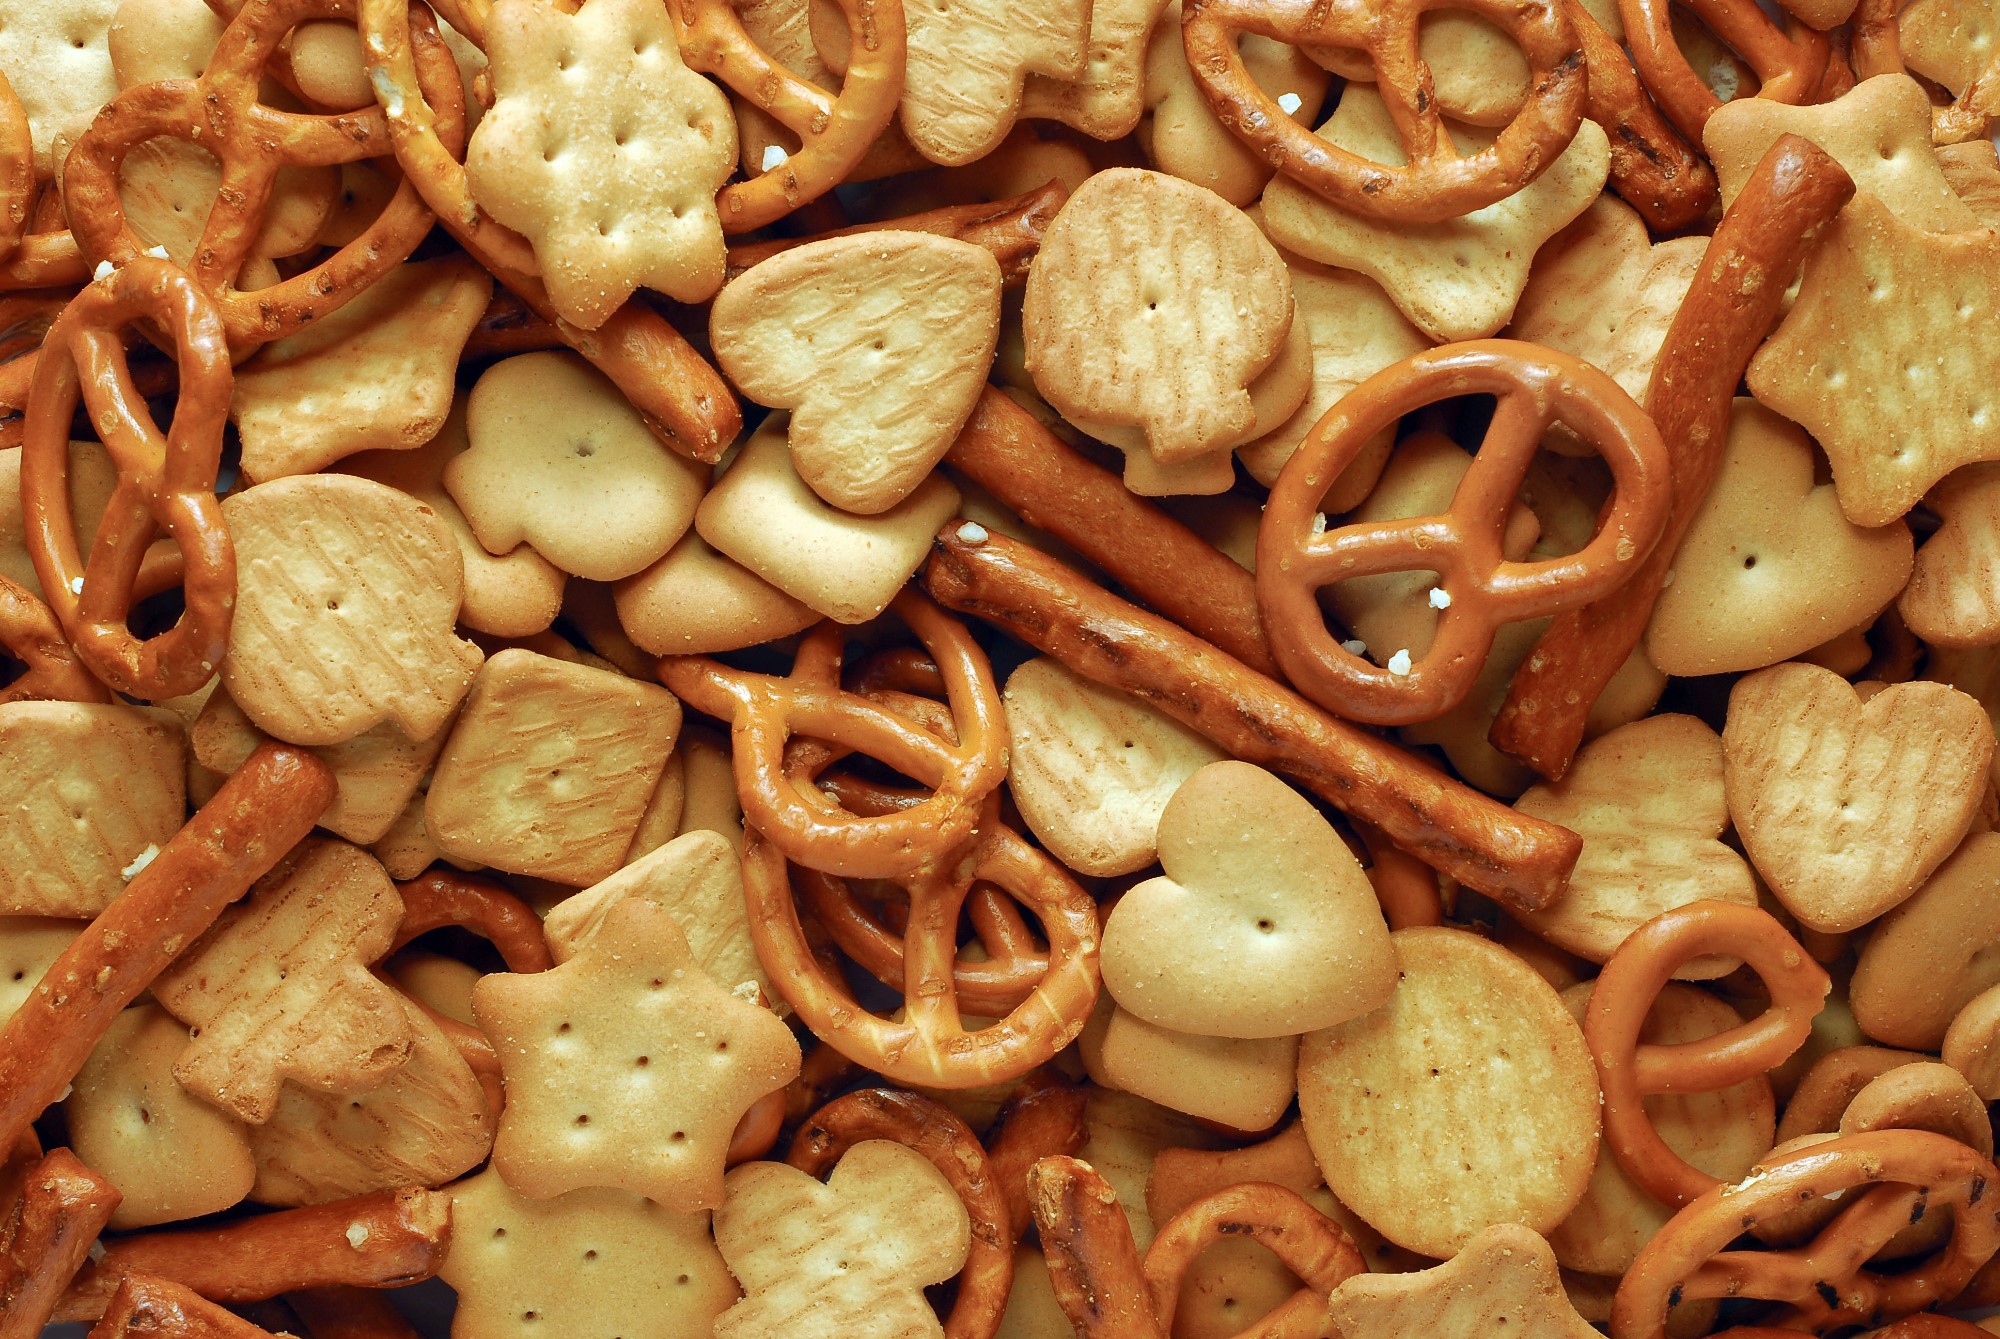 Pretzels and Baked Snacks - HCI Snack Solutions